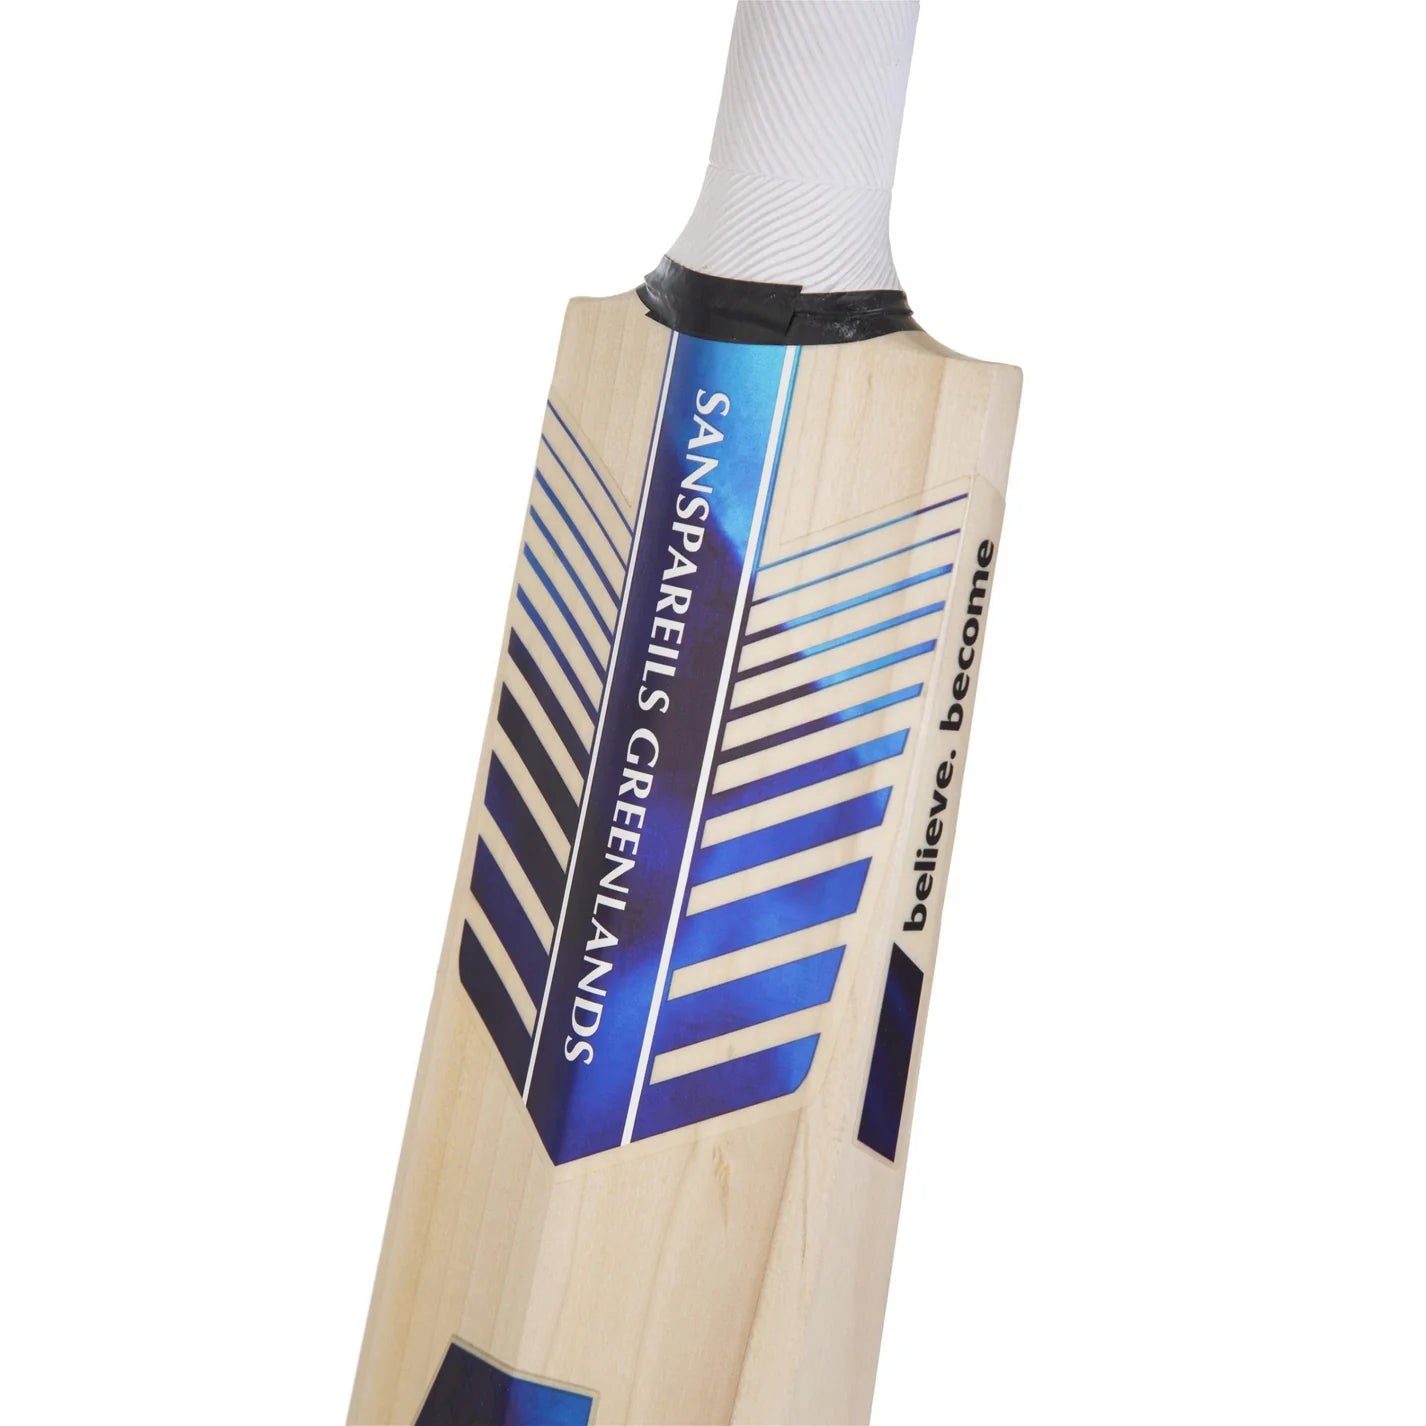 SG Triple Crown Ultimate Grade 2 Worlds Finest English Willow Cricket Bat